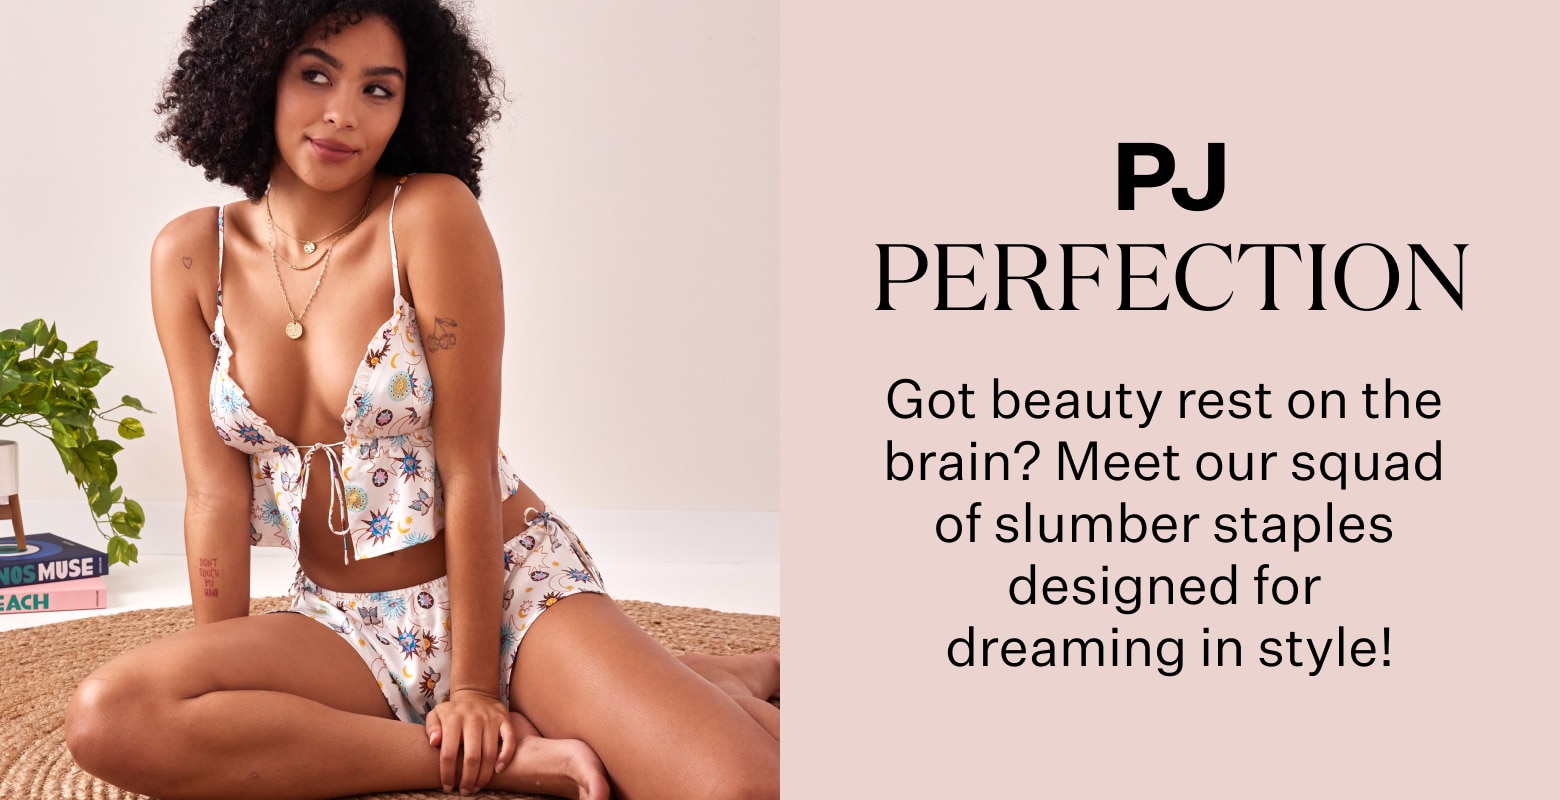 Lights out, style on. Turn your sleep game into a style statement in our range of dreamy PJs.